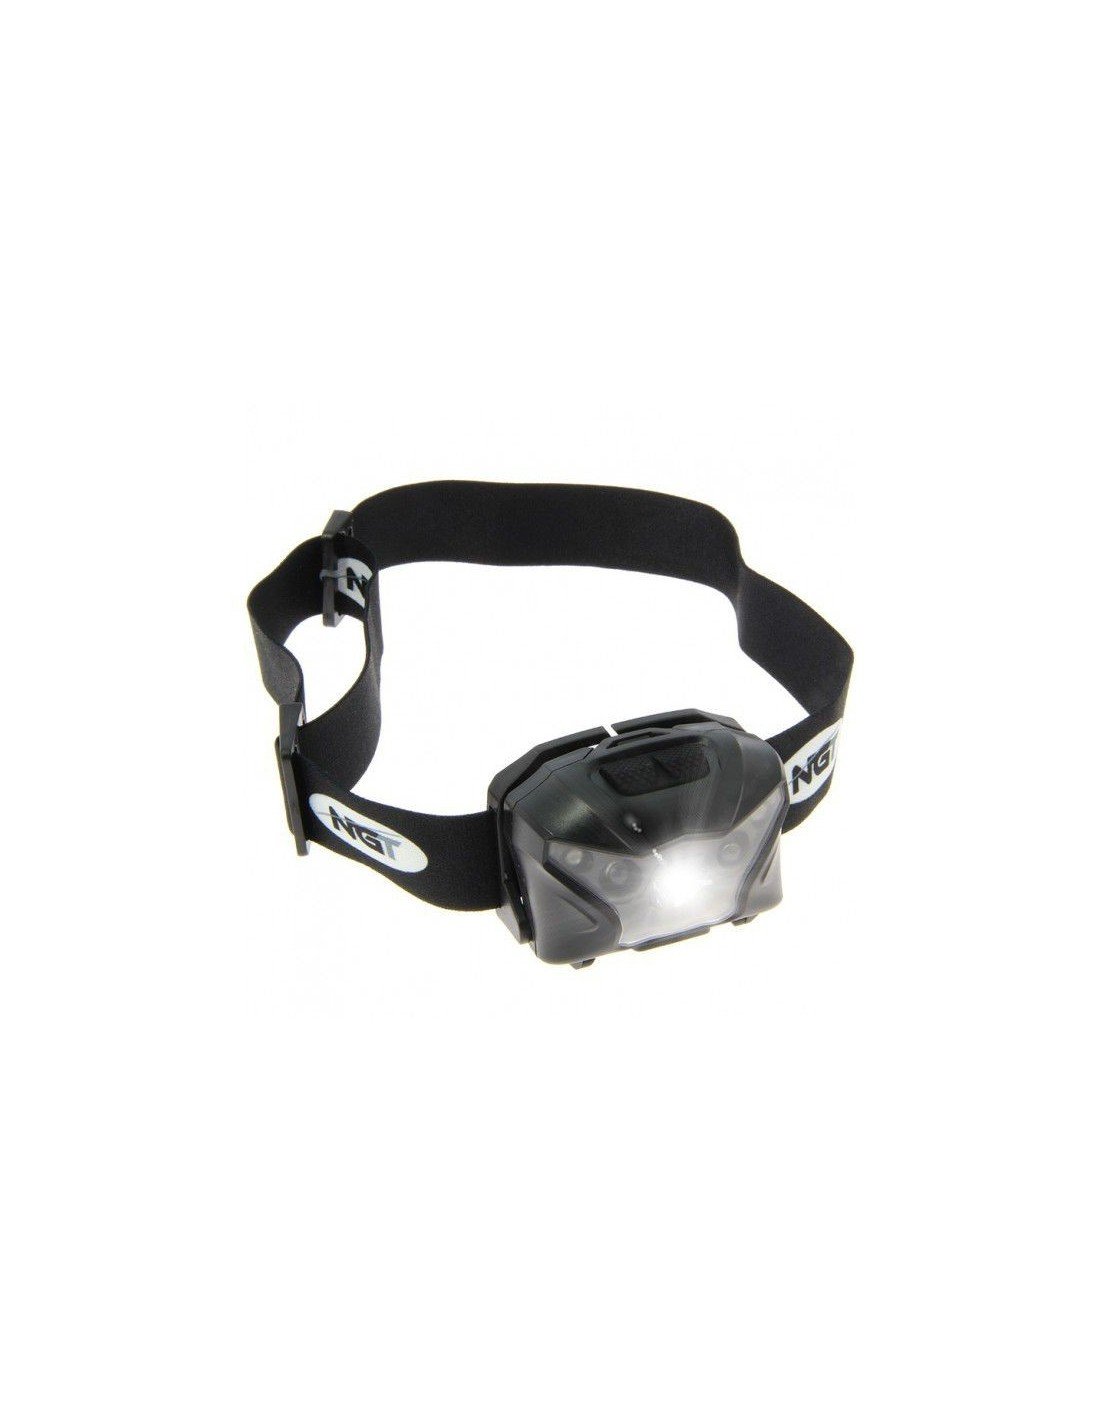 NGT XPR USB Rechargeable Headlamp челник